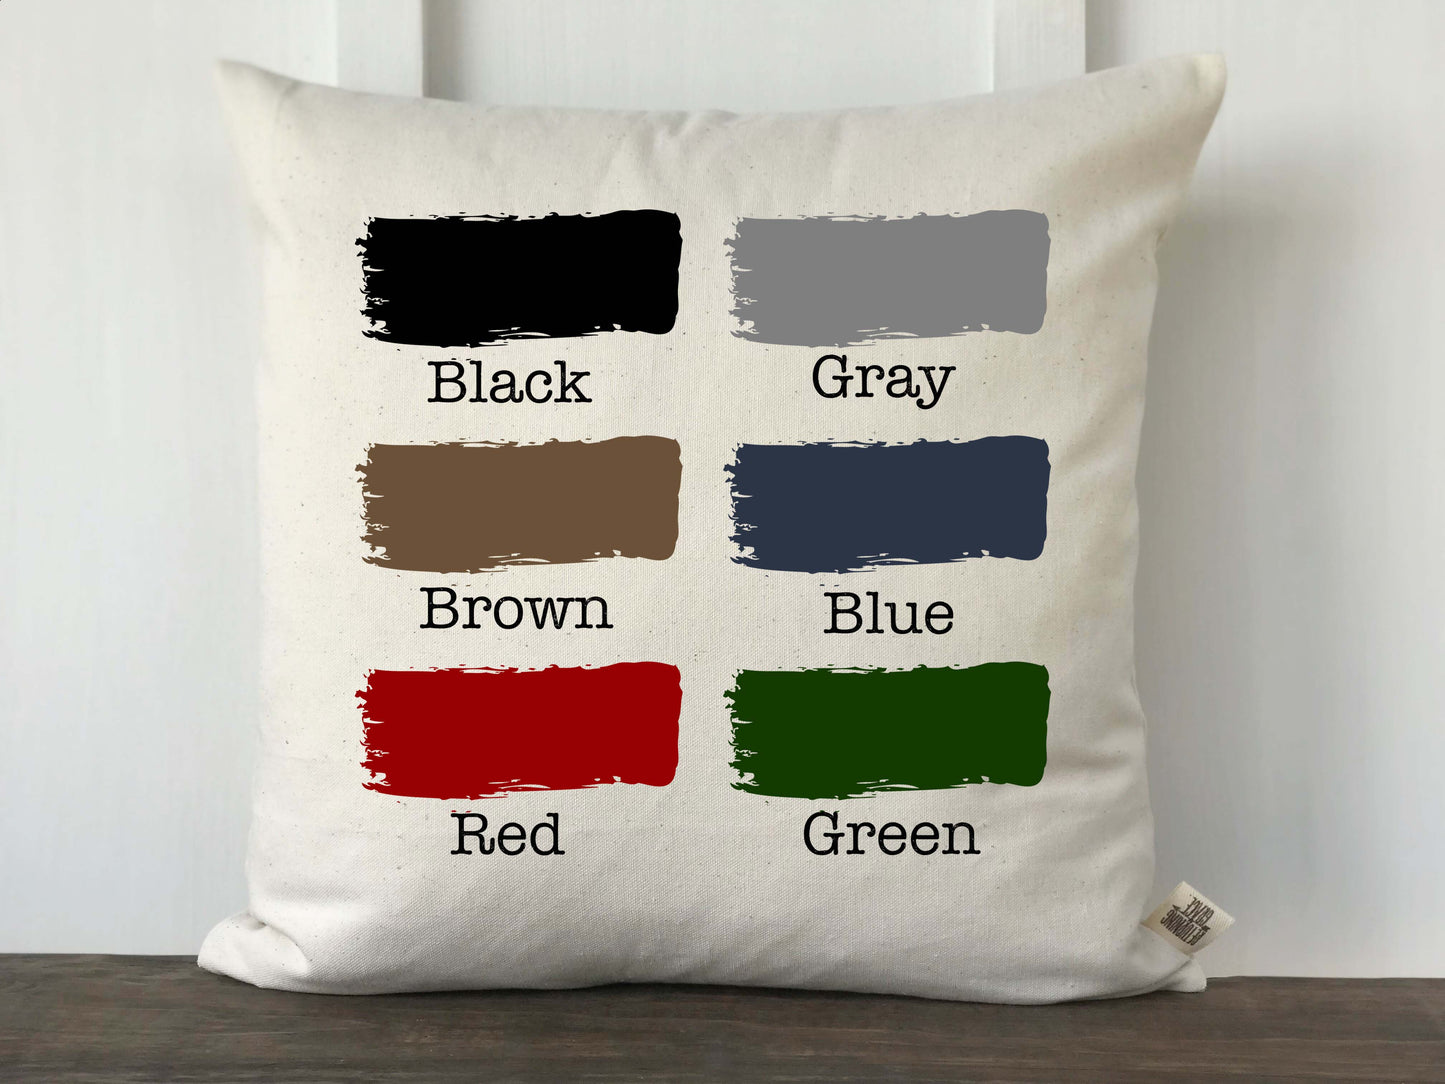 Raggedy Andy Patent Nursery Pillow Cover - Returning Grace Designs